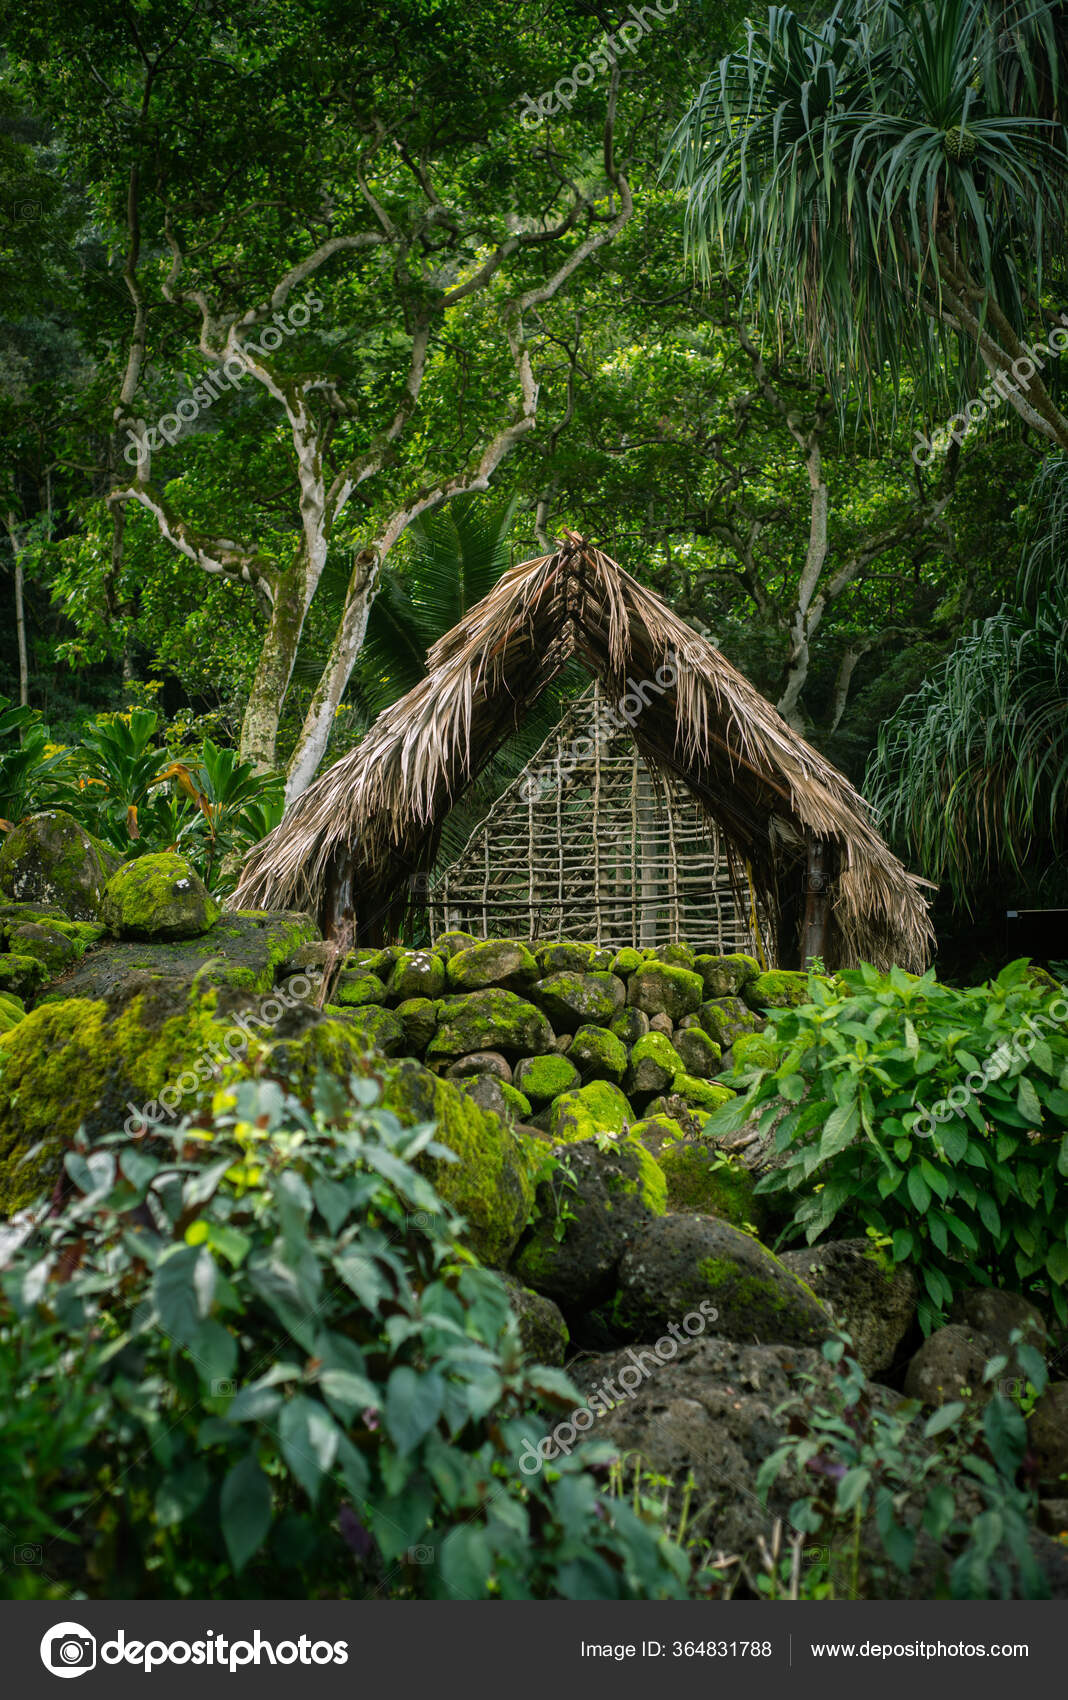  Cabane  Chaume  Polyn sienne Traditionnelle Dans Jungle 